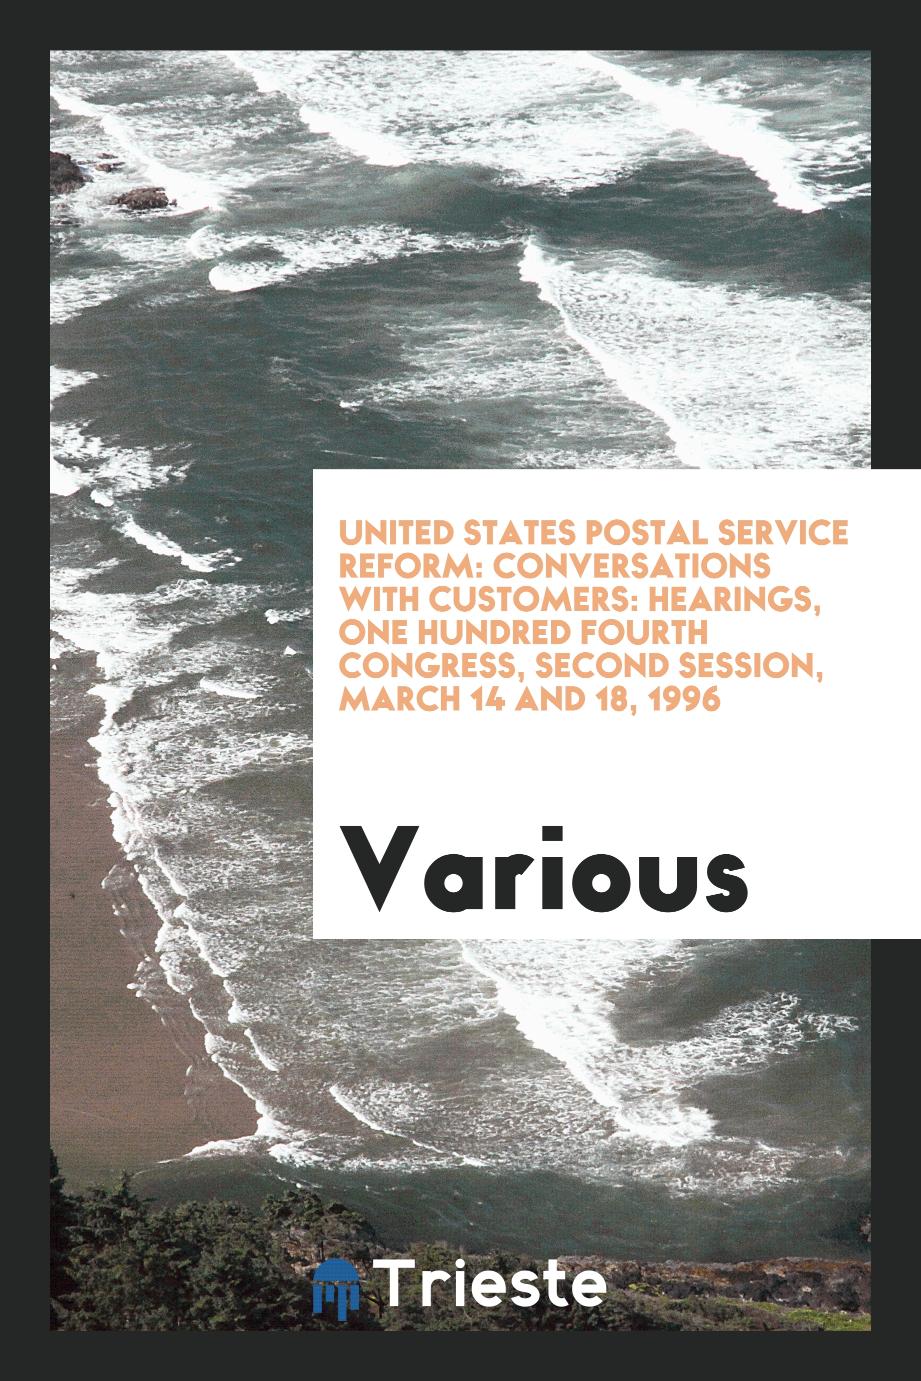 United States Postal Service reform: conversations with customers: hearings, One Hundred Fourth Congress, second session, March 14 and 18, 1996